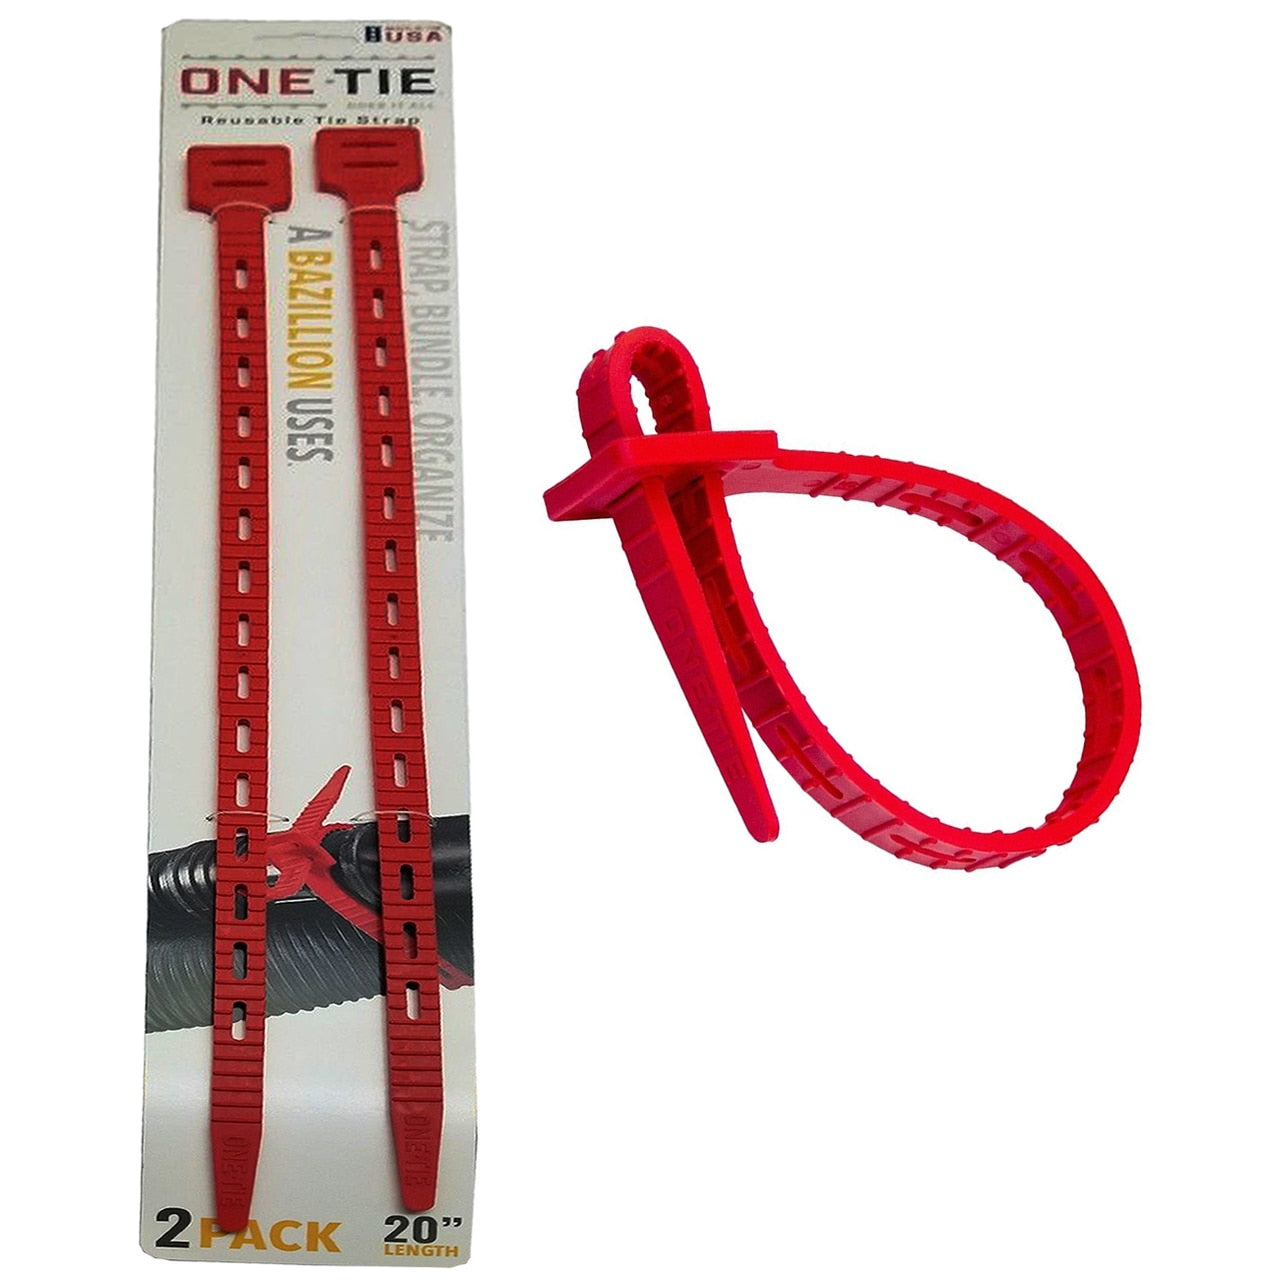 20" ONE-Tie, Color: Black or Red, 2 Pack